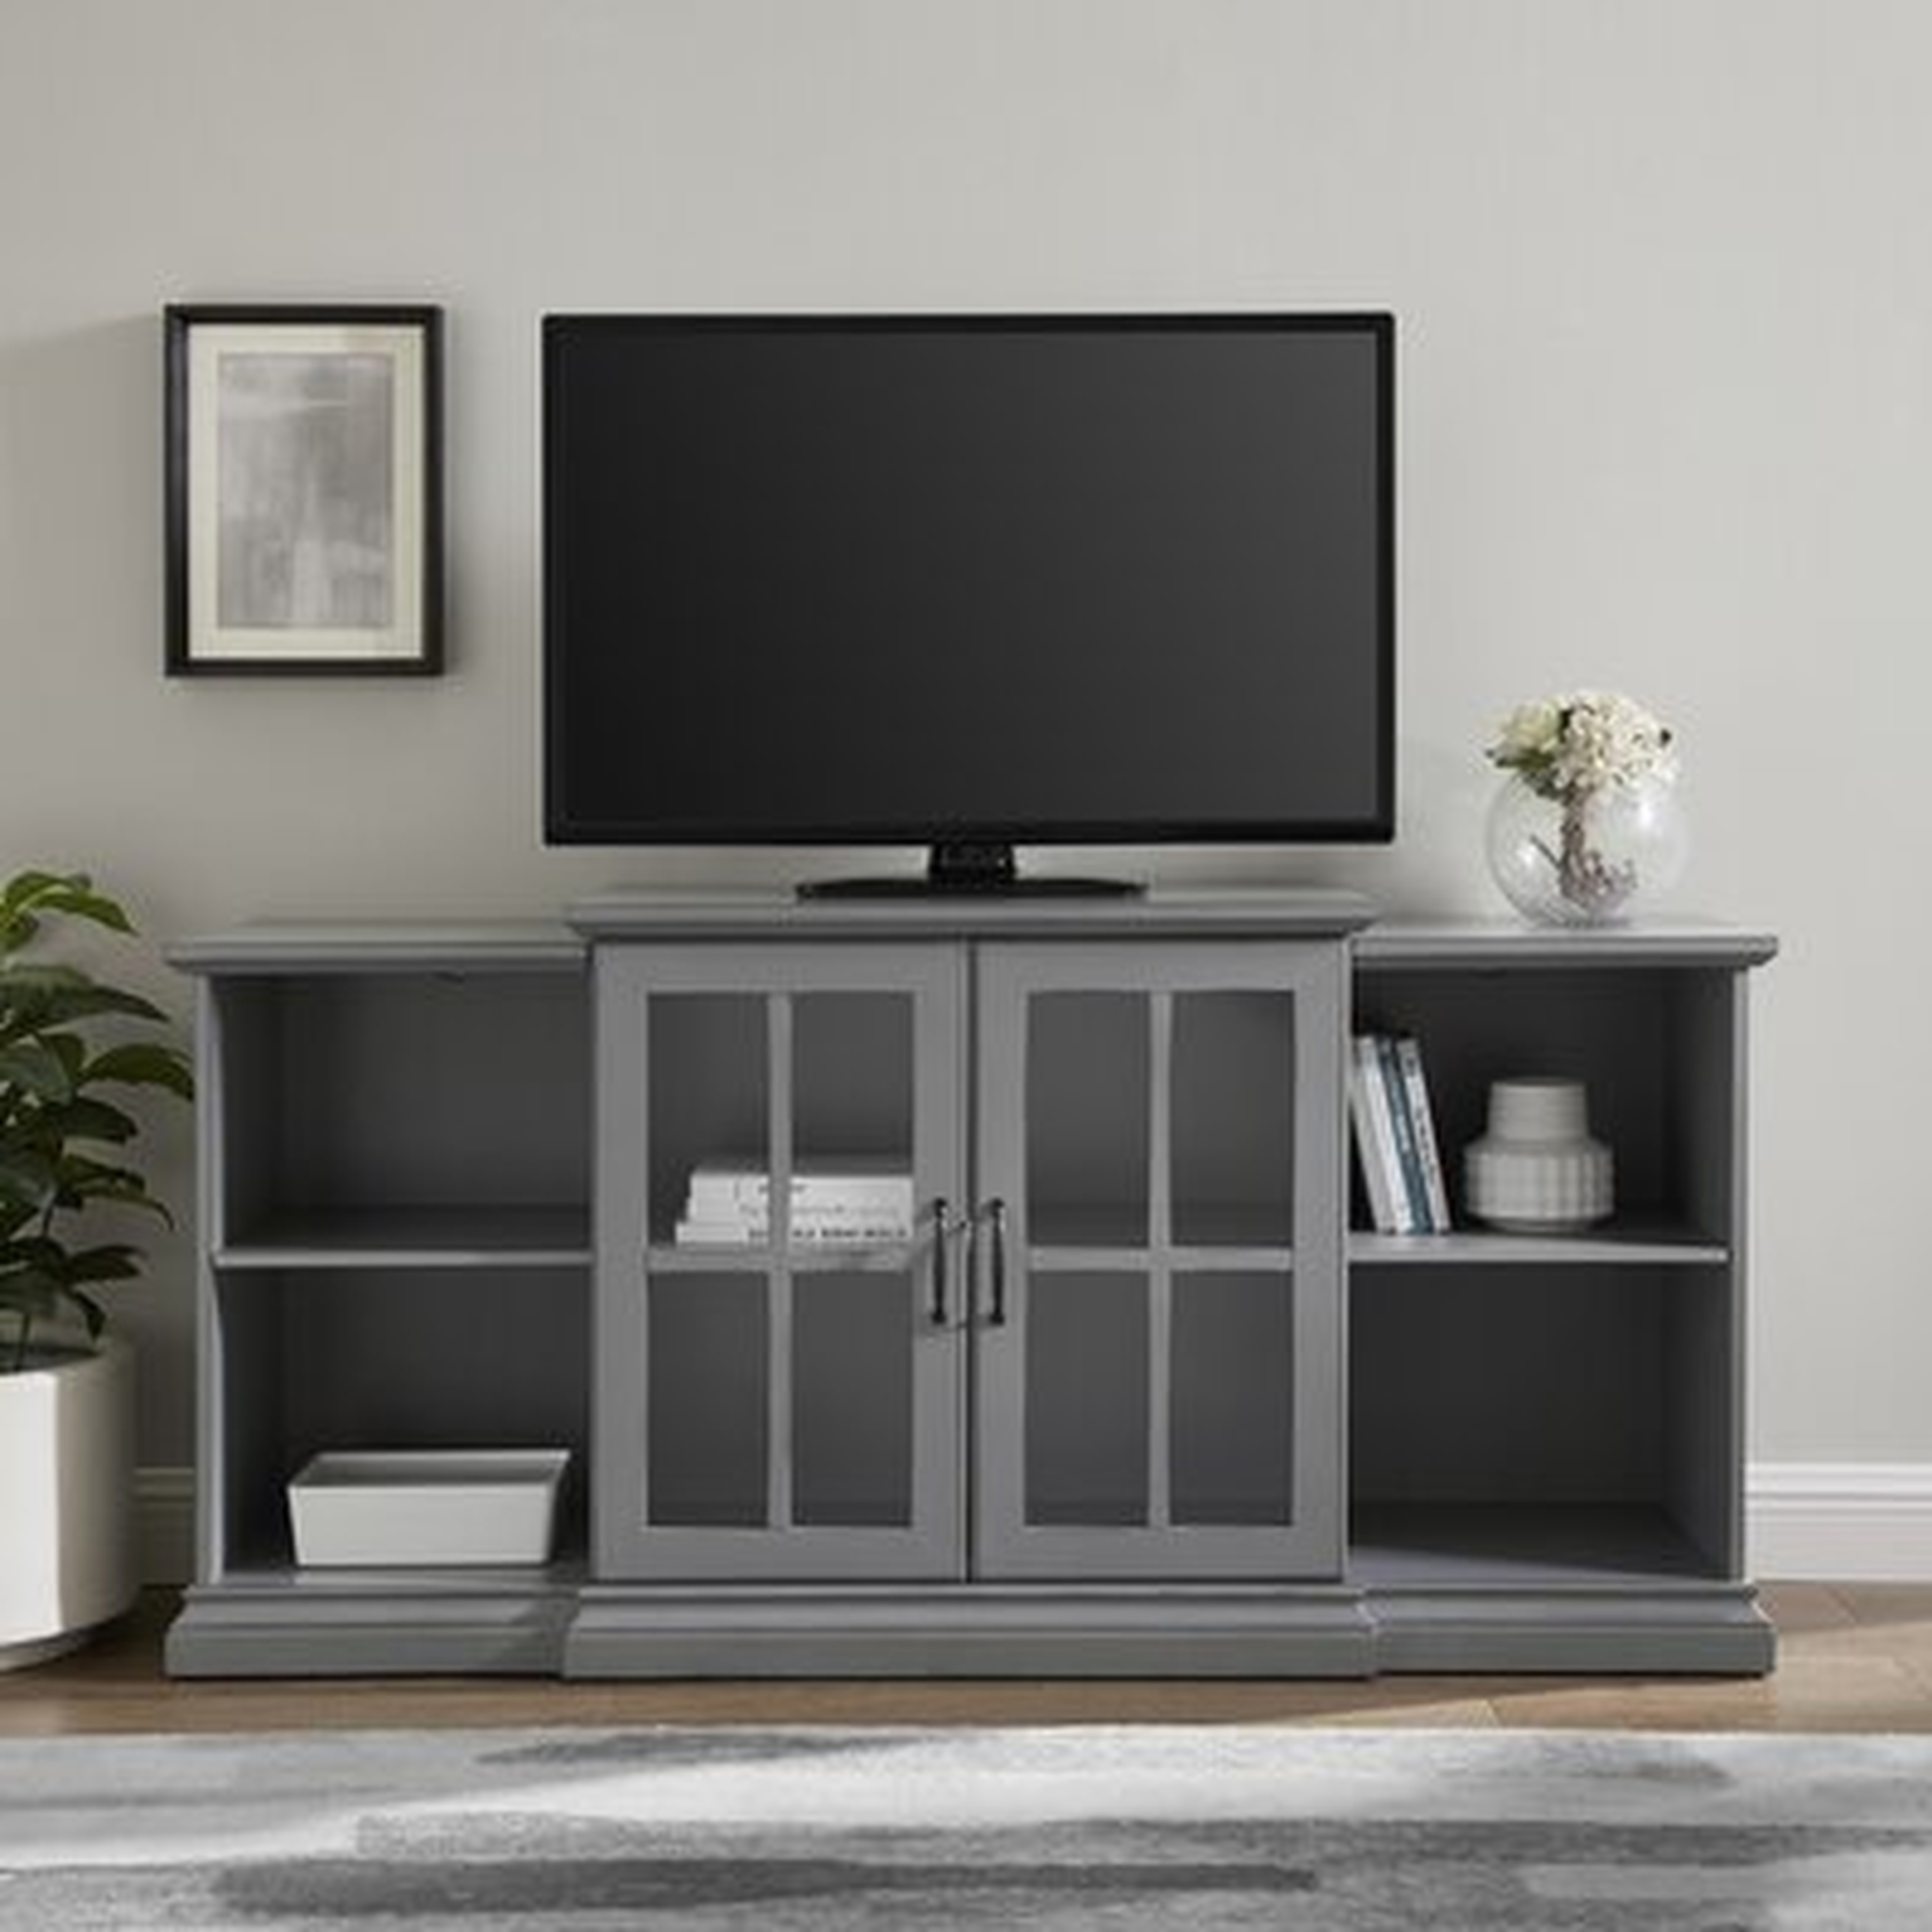 Taft Cabinet/Enclosed storage TV Stand for TVs up to 65" inches - Wayfair